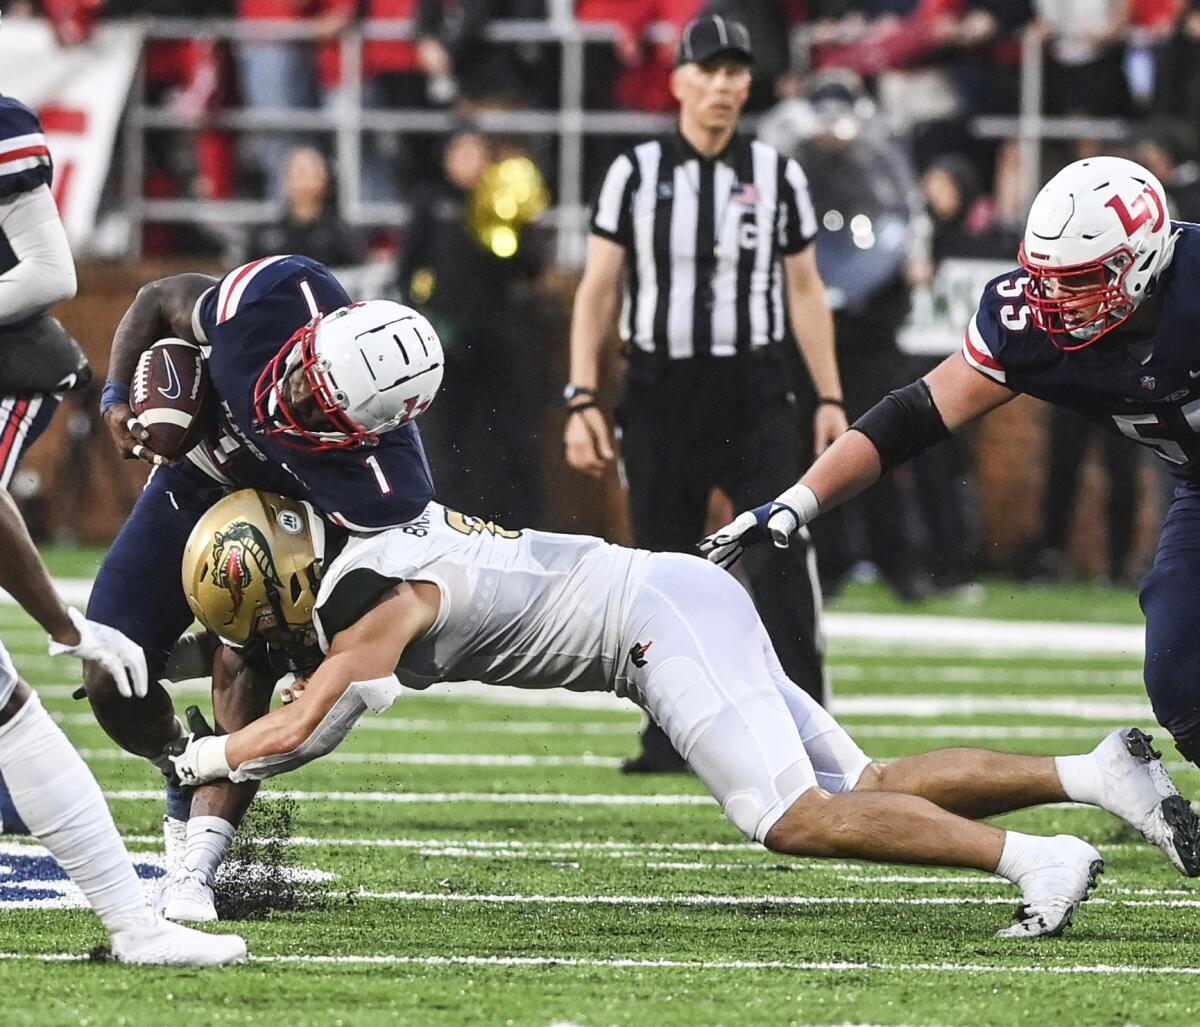 Liberty's Kaidon Salter, left, is tackled by UAB's Jackson Bratton during an NCAA college football game Saturday, Sept. 10, 2022, in Lynchburg, Va. (Paige Dingler/The News & Advance via AP)